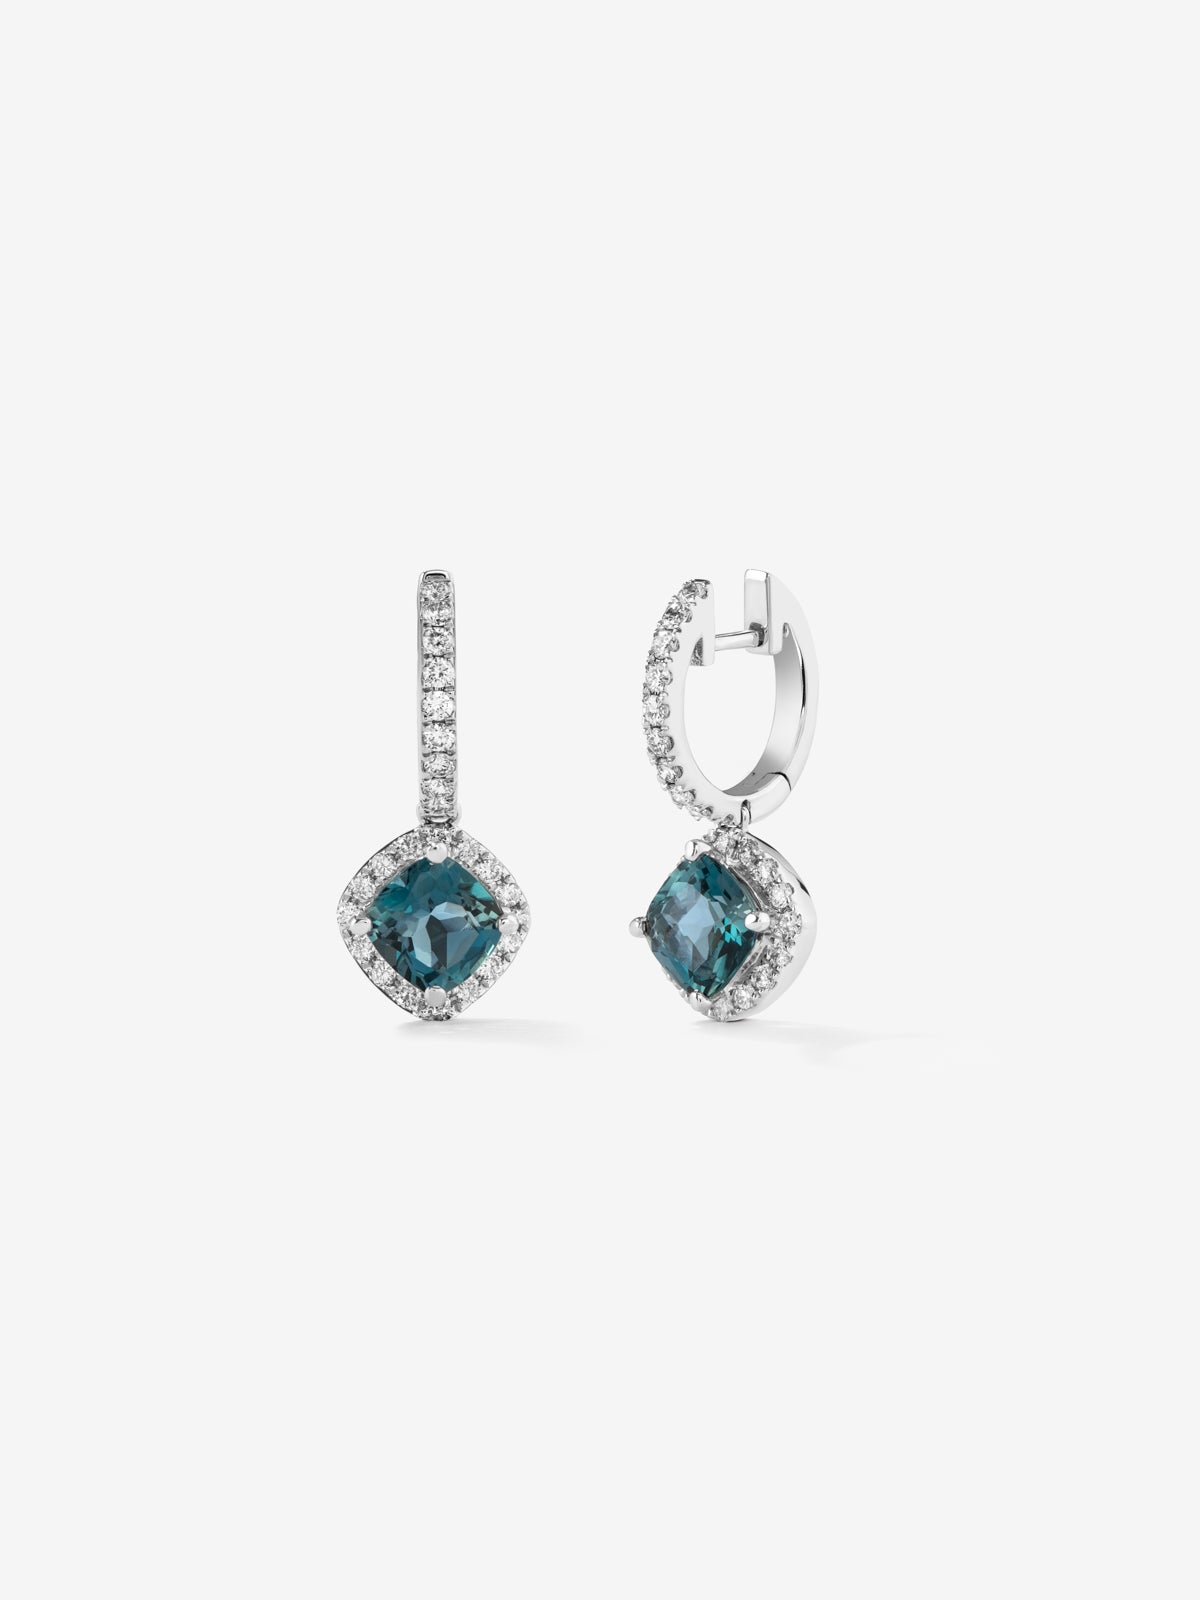 18K white gold hoop earrings with 2 cushion-cut London blue topazes with a total of 2.16 cts and 52 brilliant-cut diamonds with a total of 0.49 cts